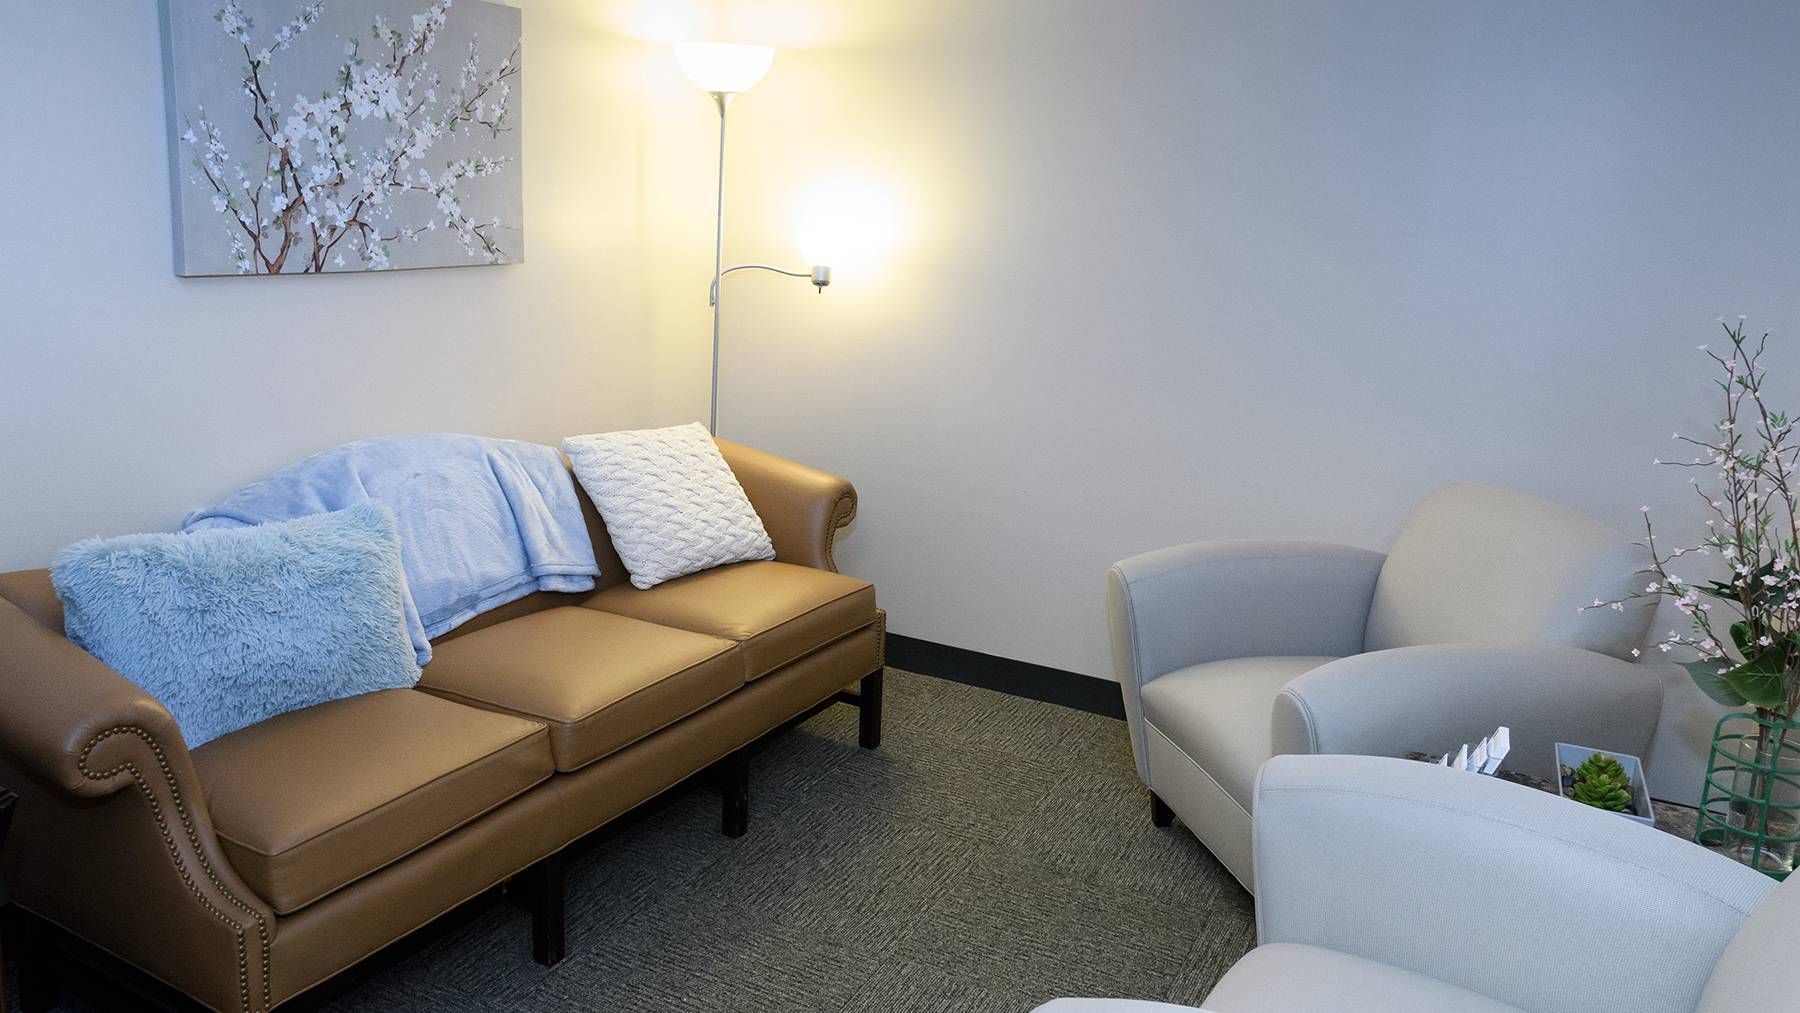 An area of the Campus Violence Response Center is shown with soft lighting, a couch, and two armchairs.